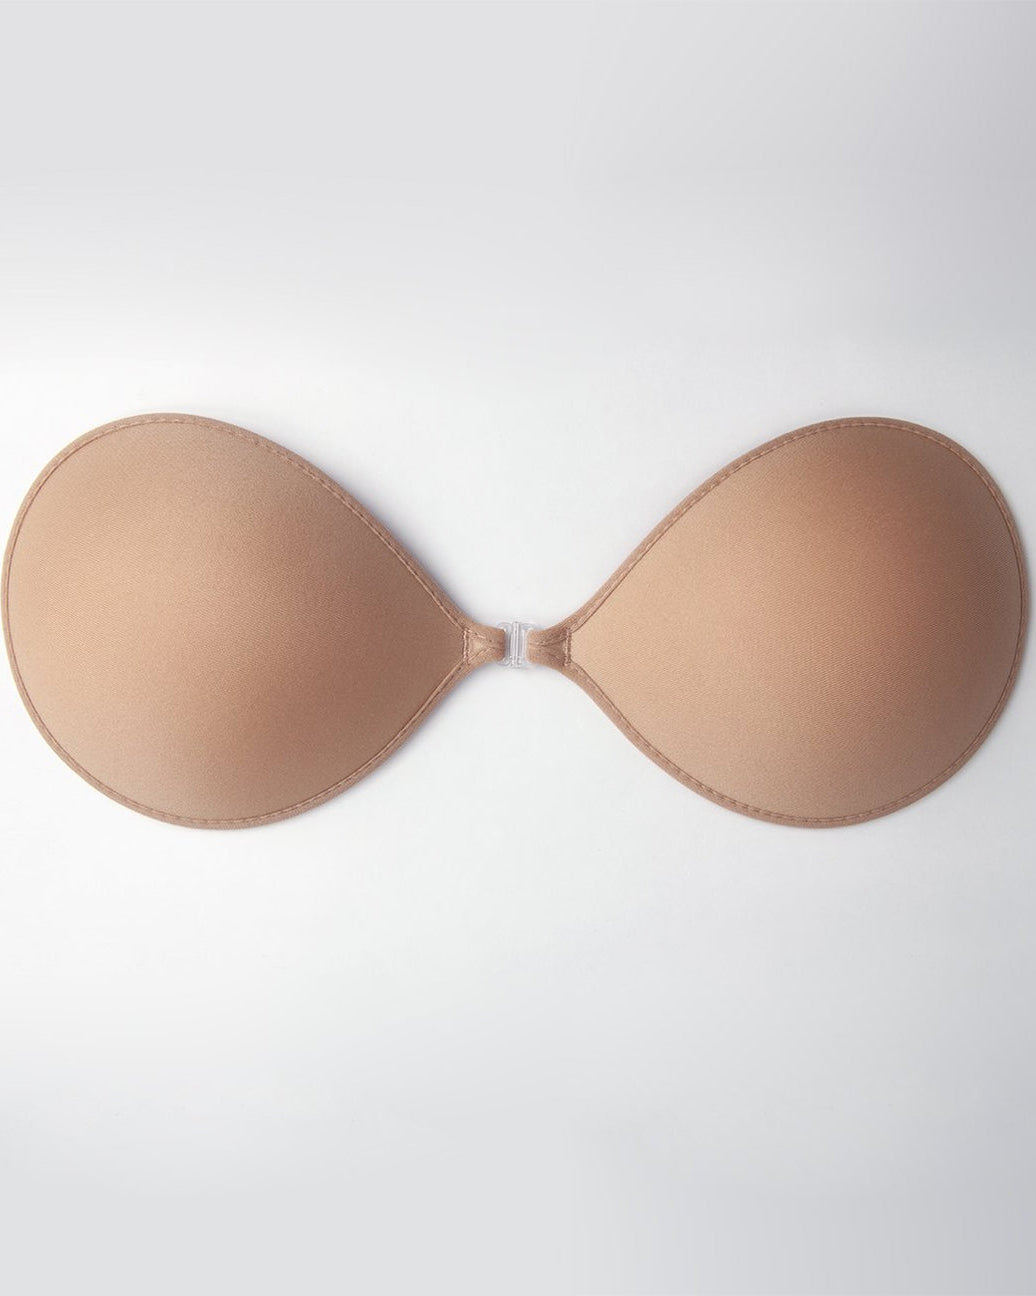 Fashion Forms NuBra Ultralite Front Closure Backless Strapless Bra